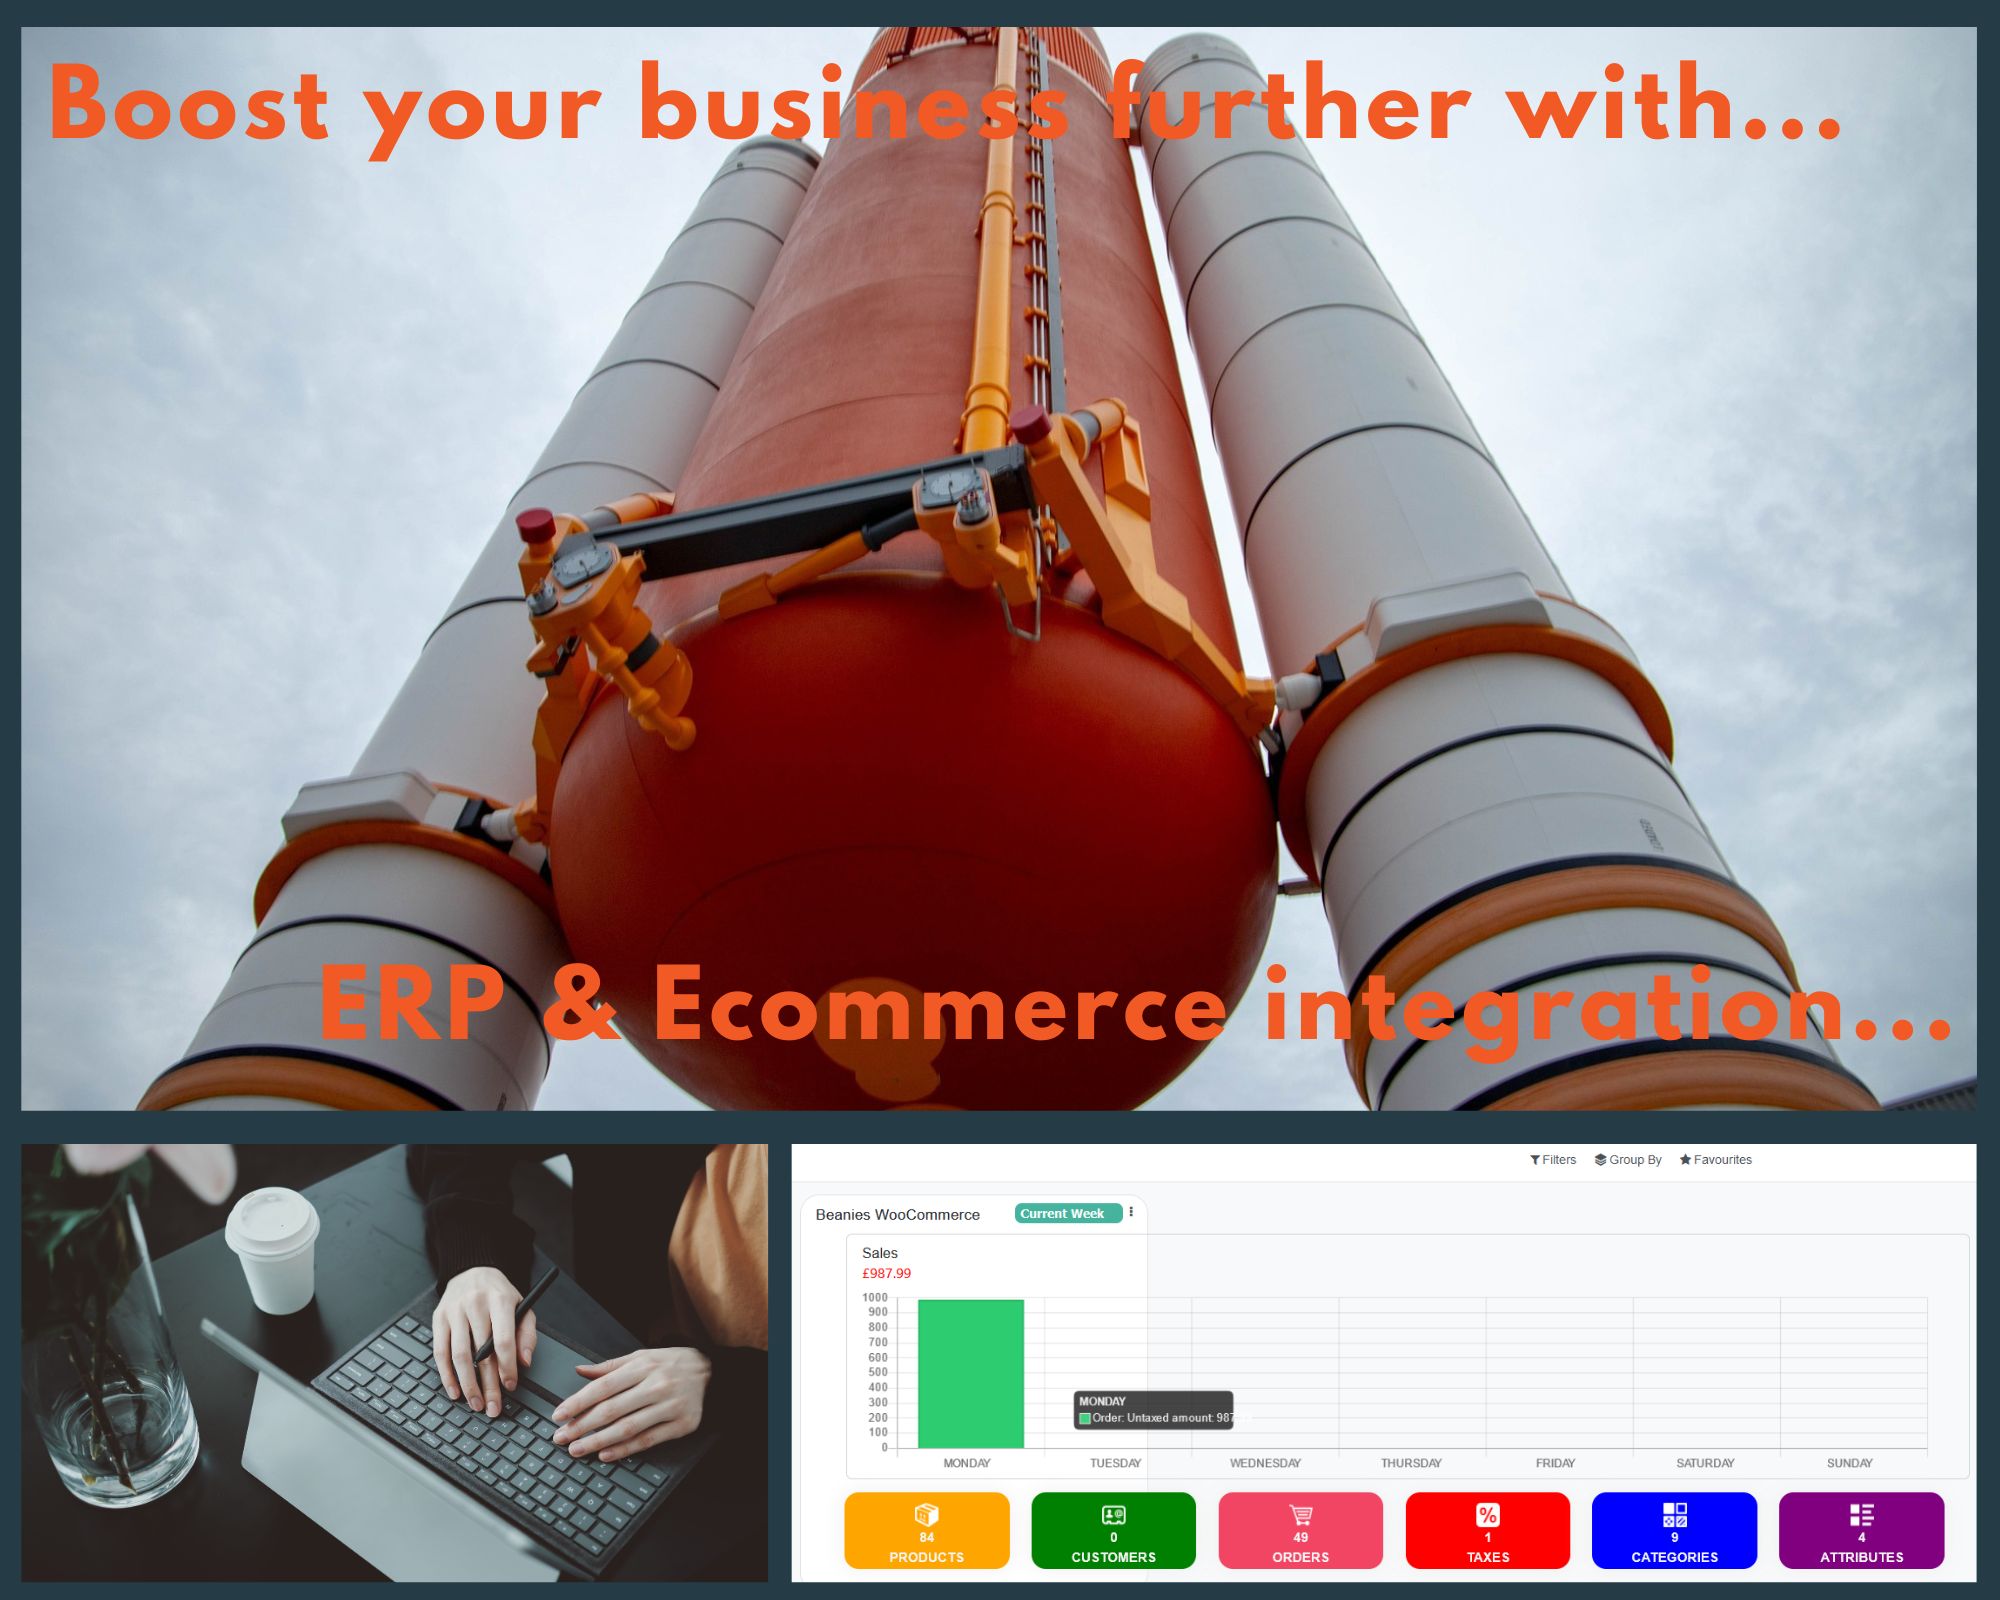 ERP Software Ecommerce Integration - A Boost for Your Business